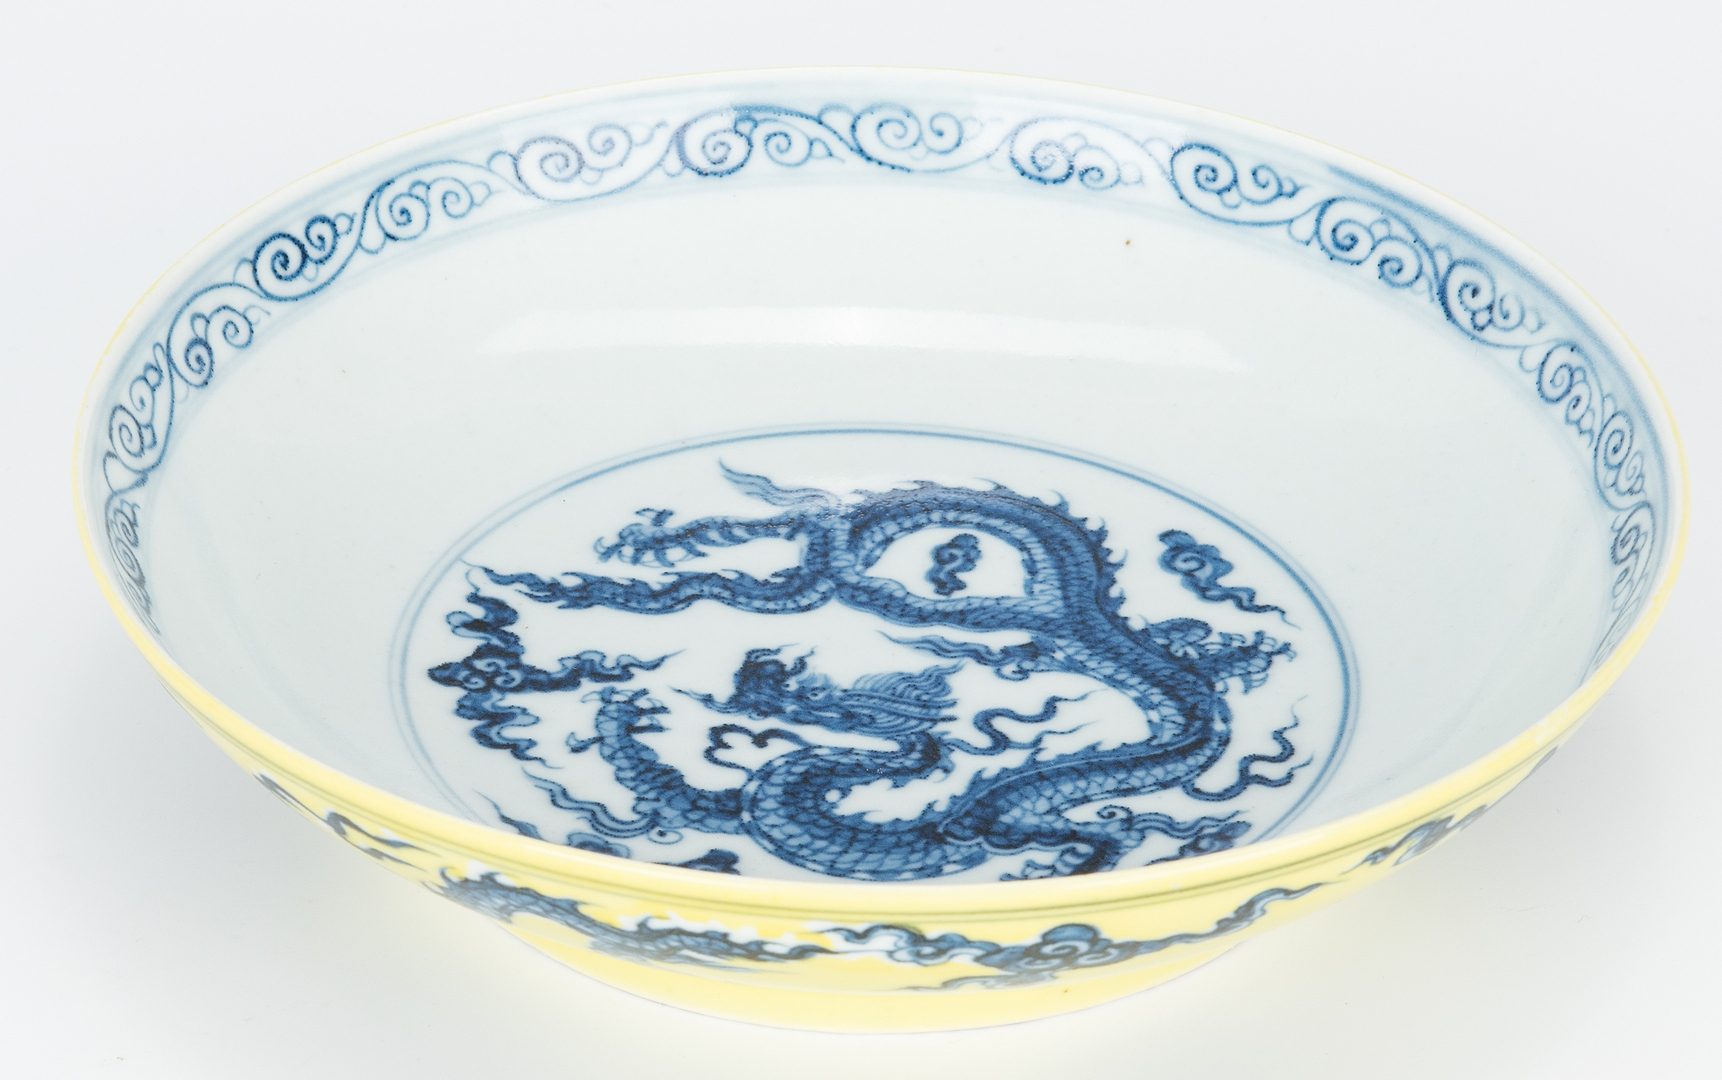 Lot 249: Ming Style Blue & White Dragon Dish w/ yellow clobbered decoration